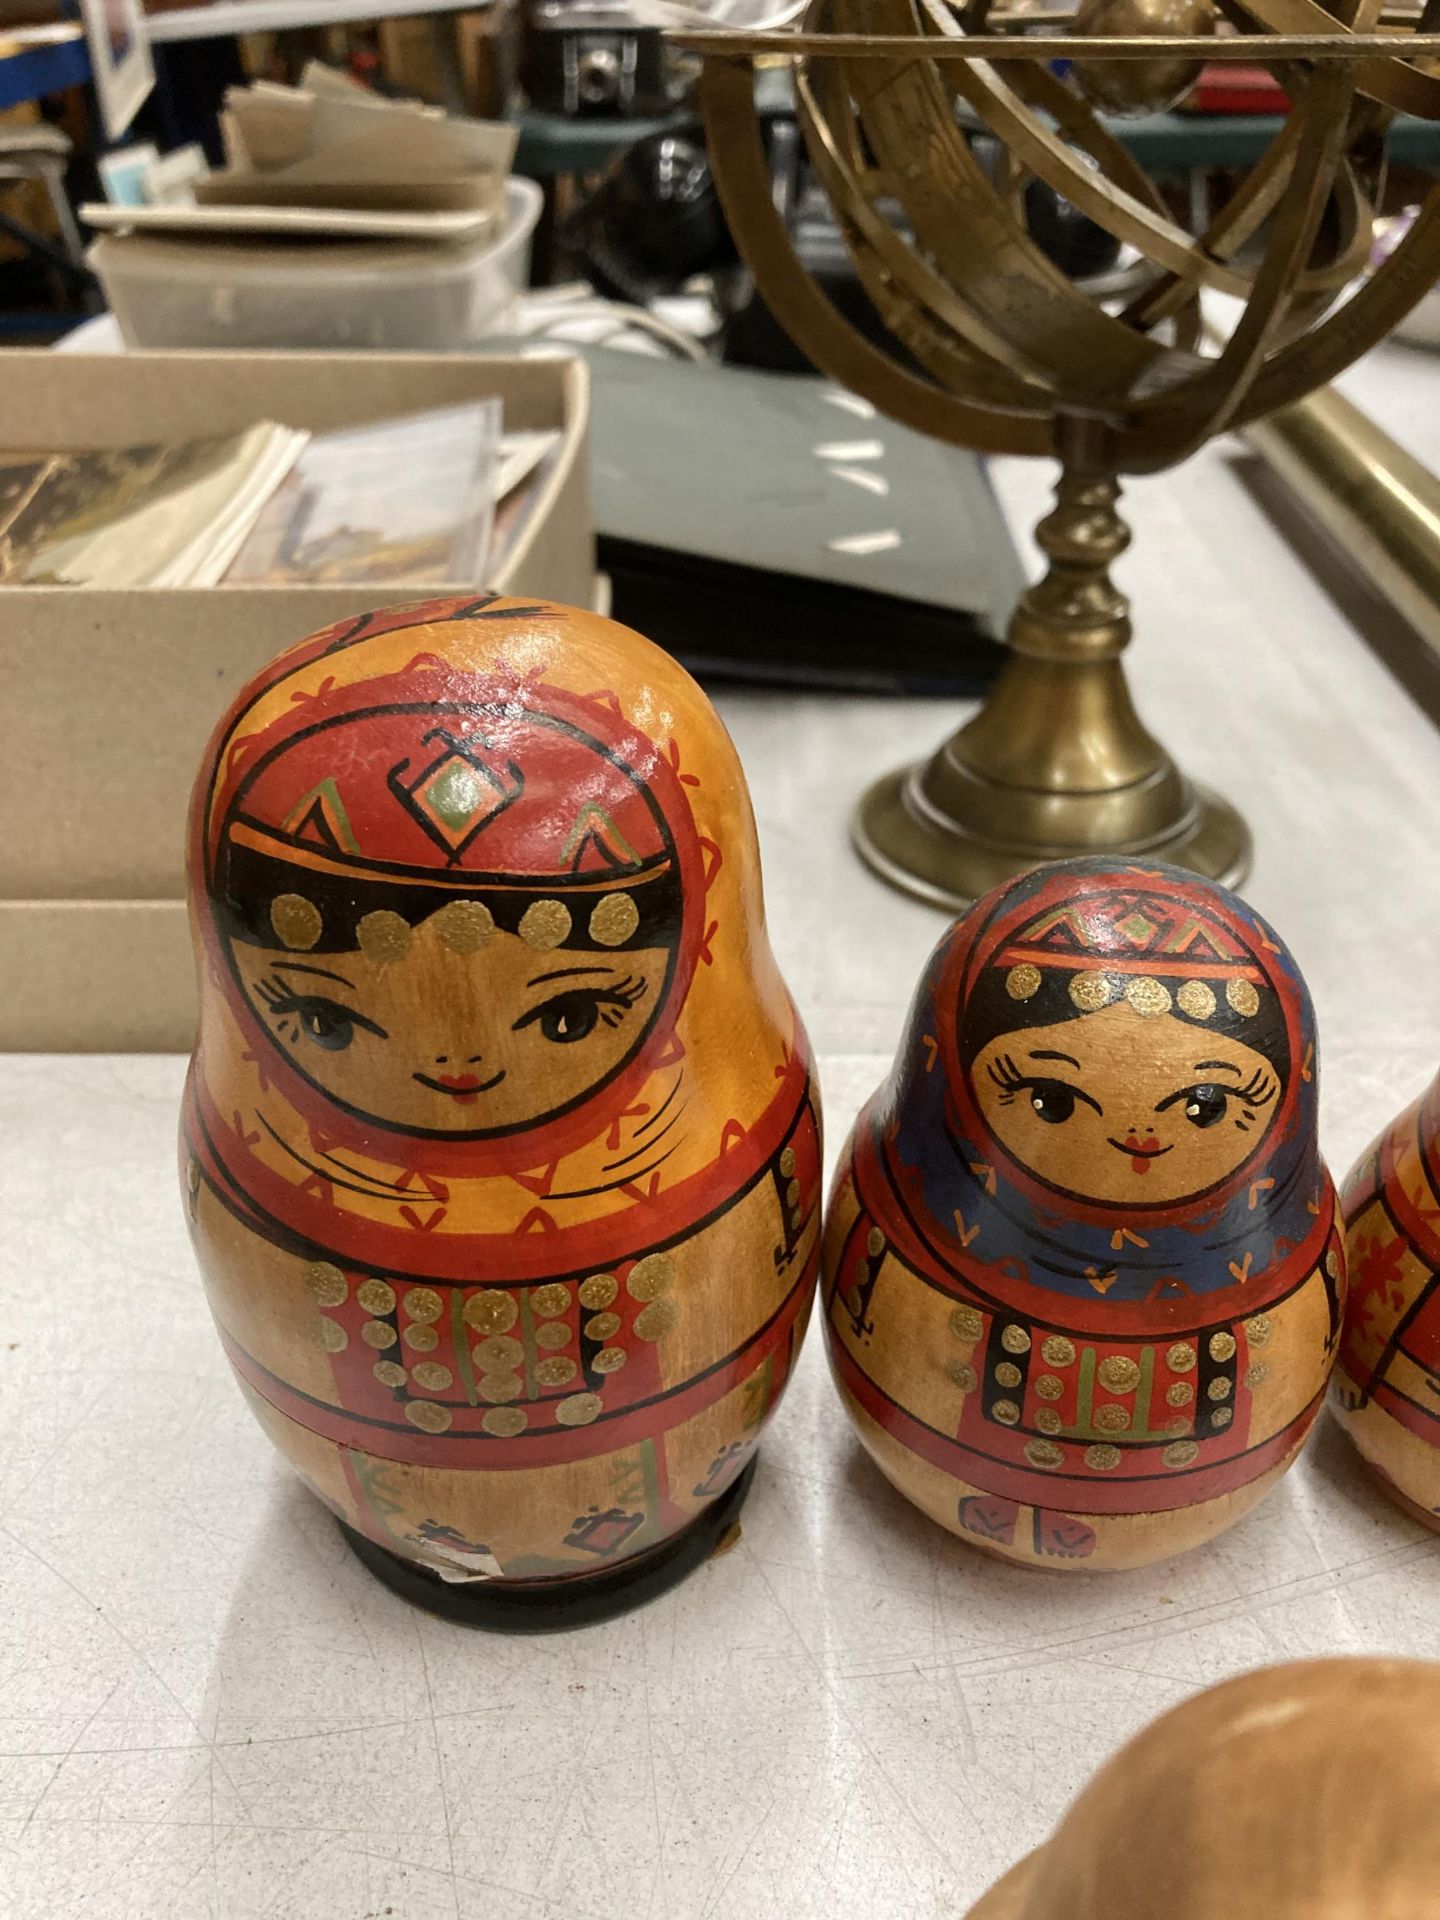 THREE SETS OF RUSSIAN STYLE NESTING DOLLS - Image 4 of 4